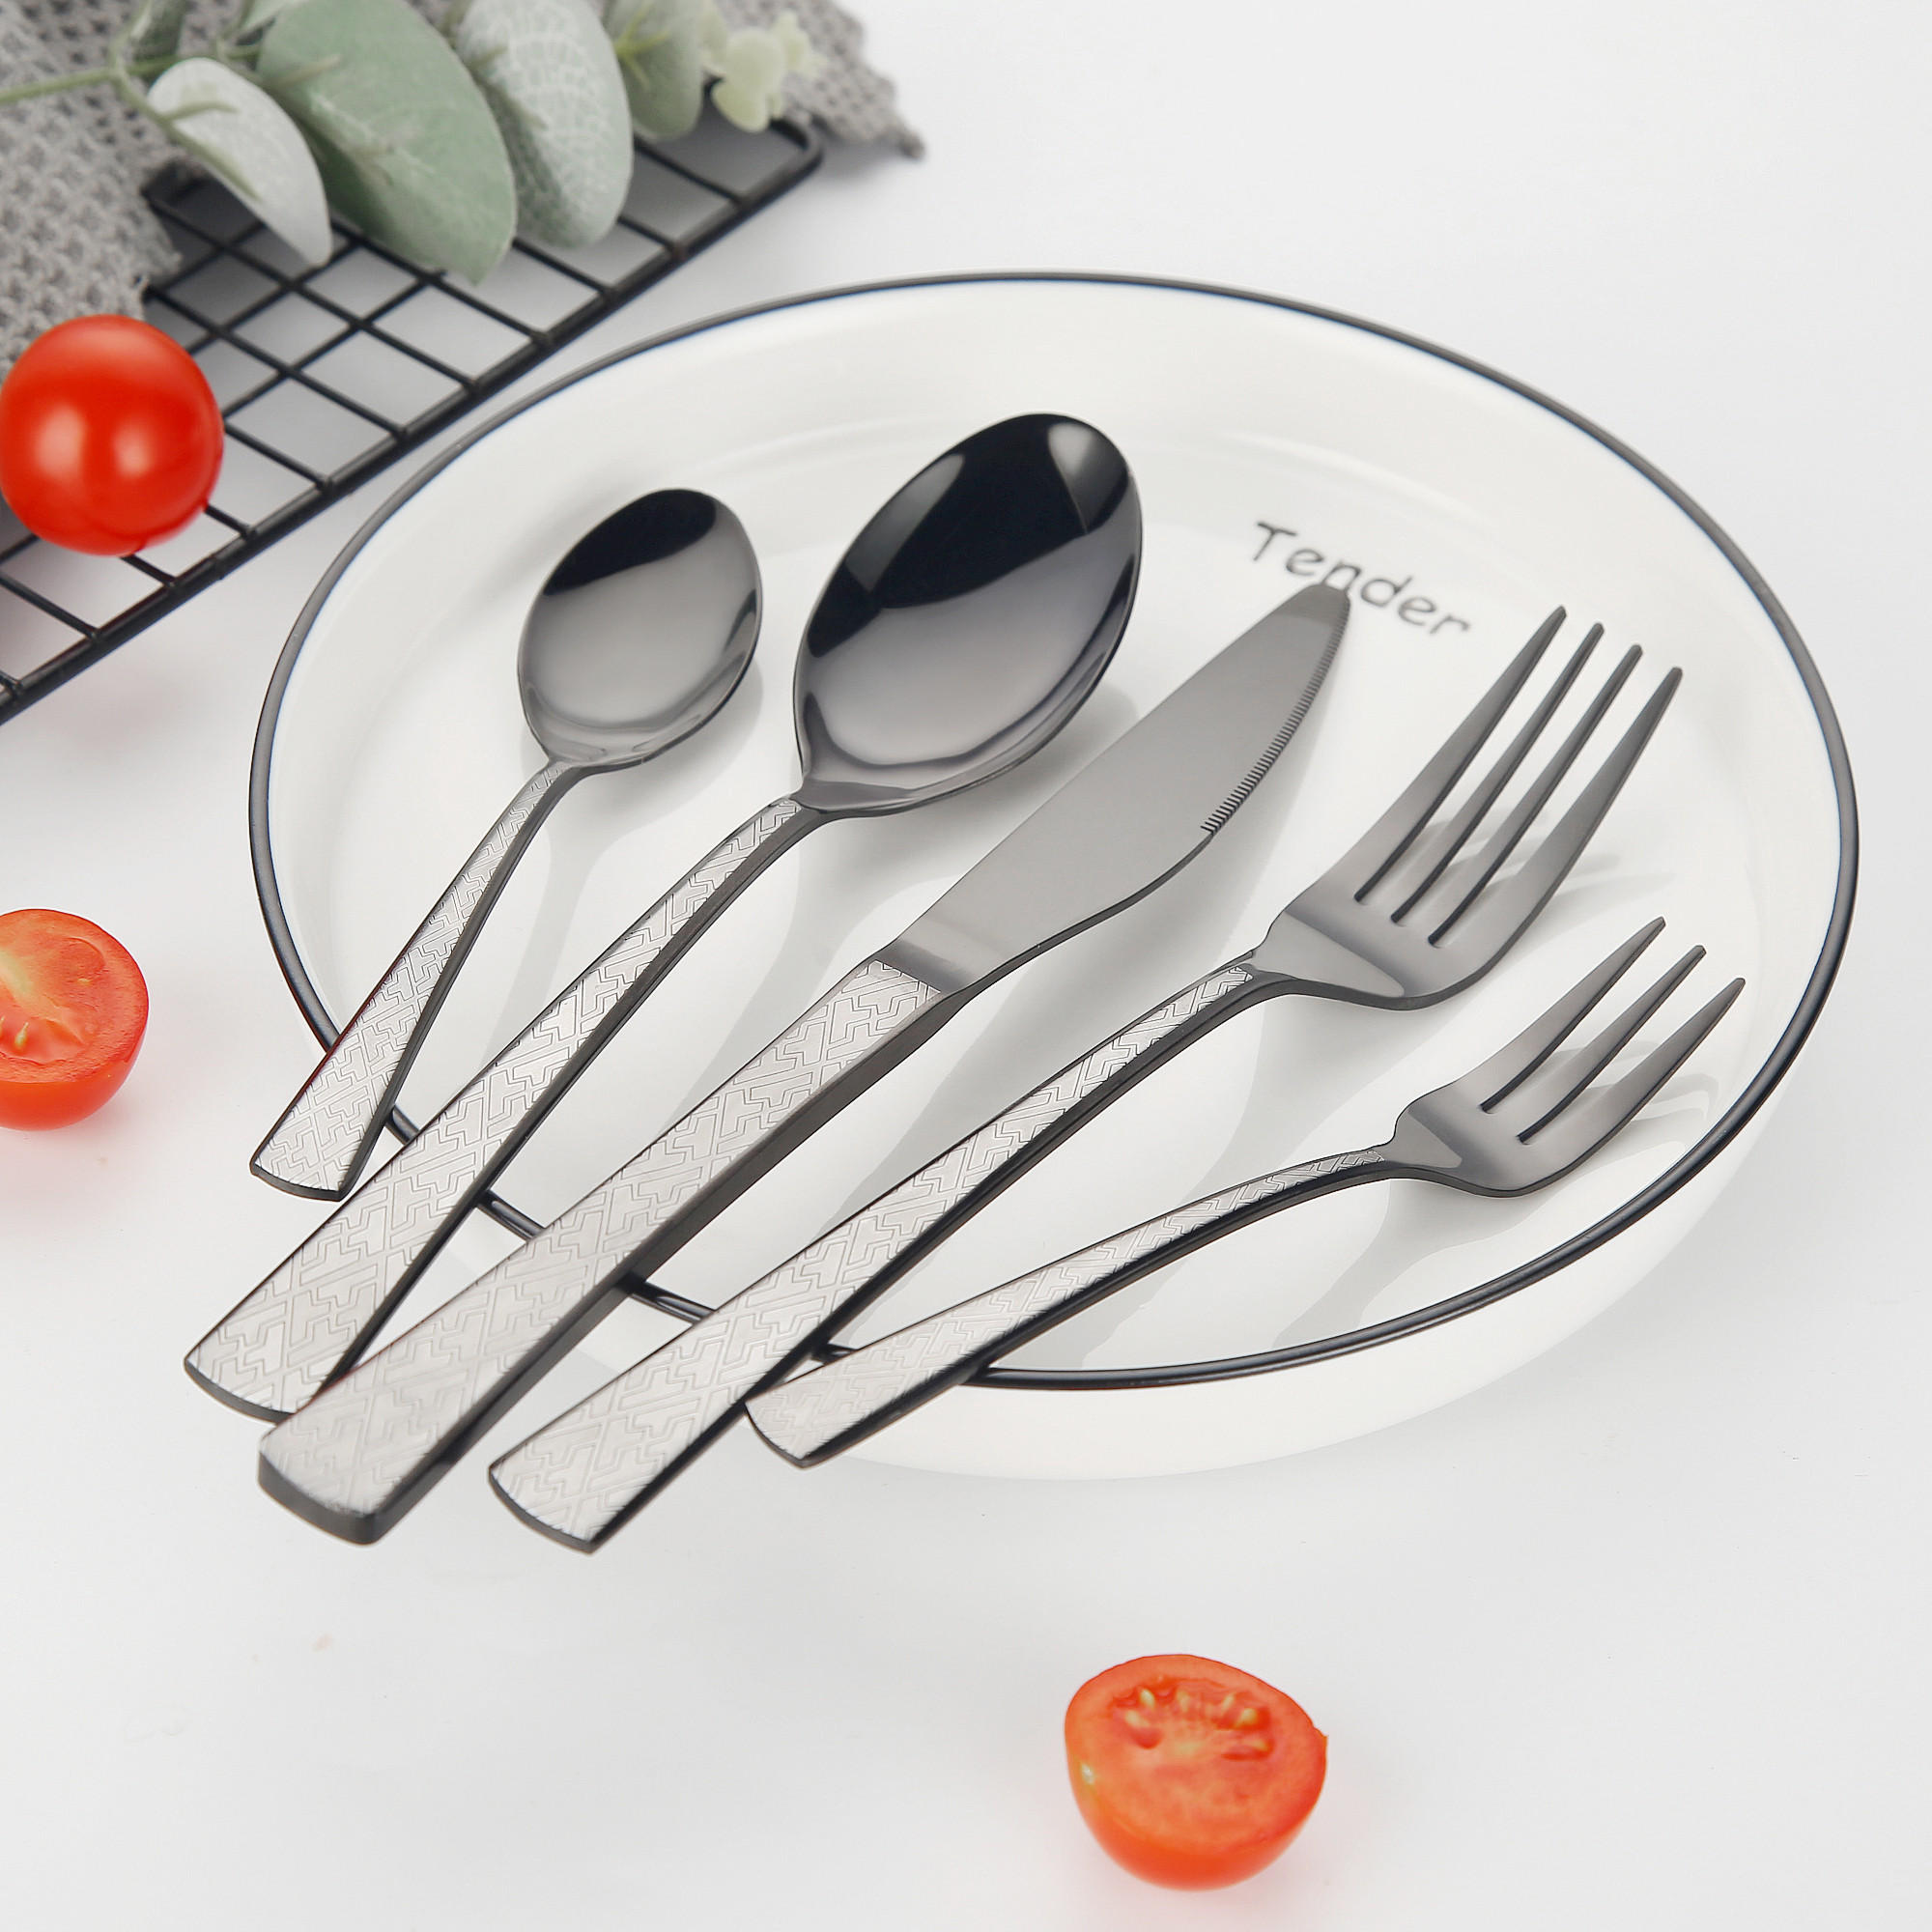 SUNHOME 30-Piece Stainless Steel Cutlery Set Black